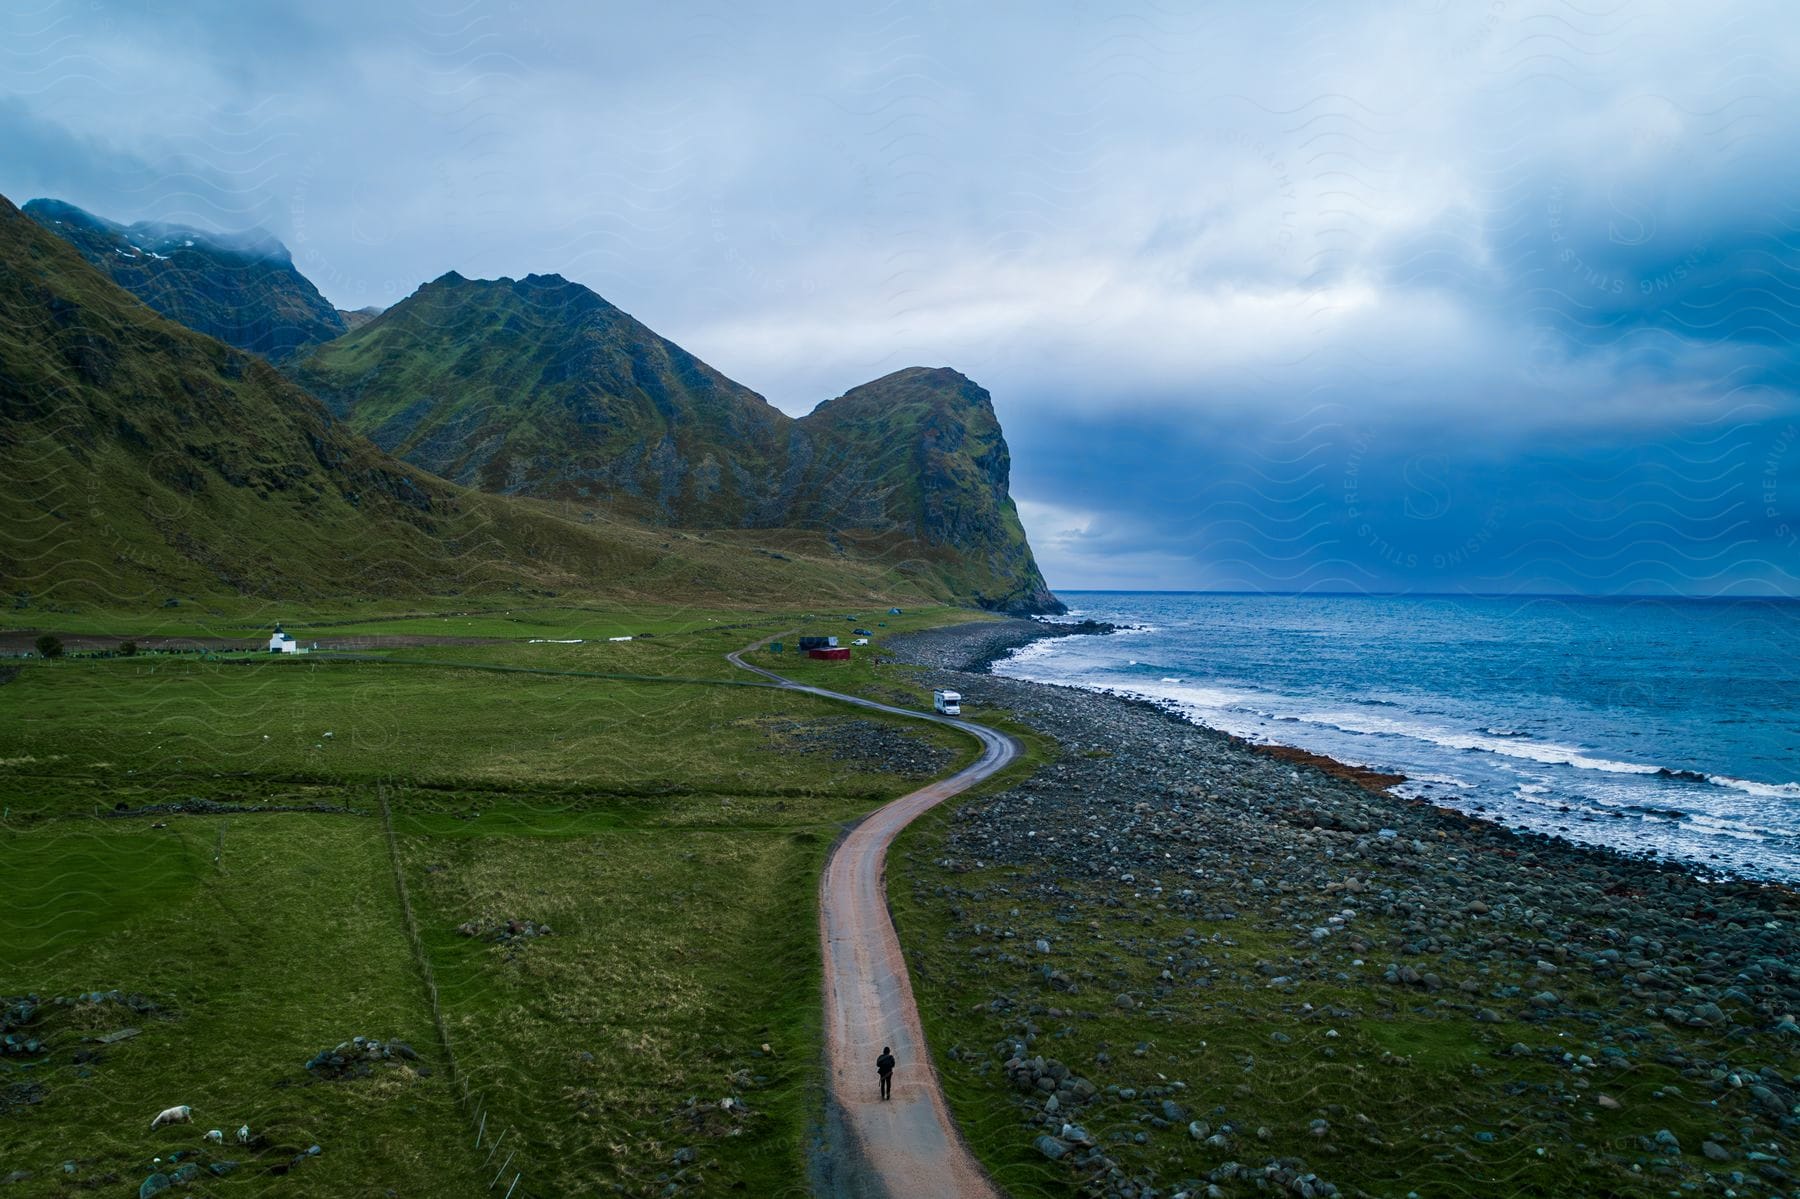 Person walking on a road along the coast as waves roll into shore with mountains in the distance under a cloudy sky